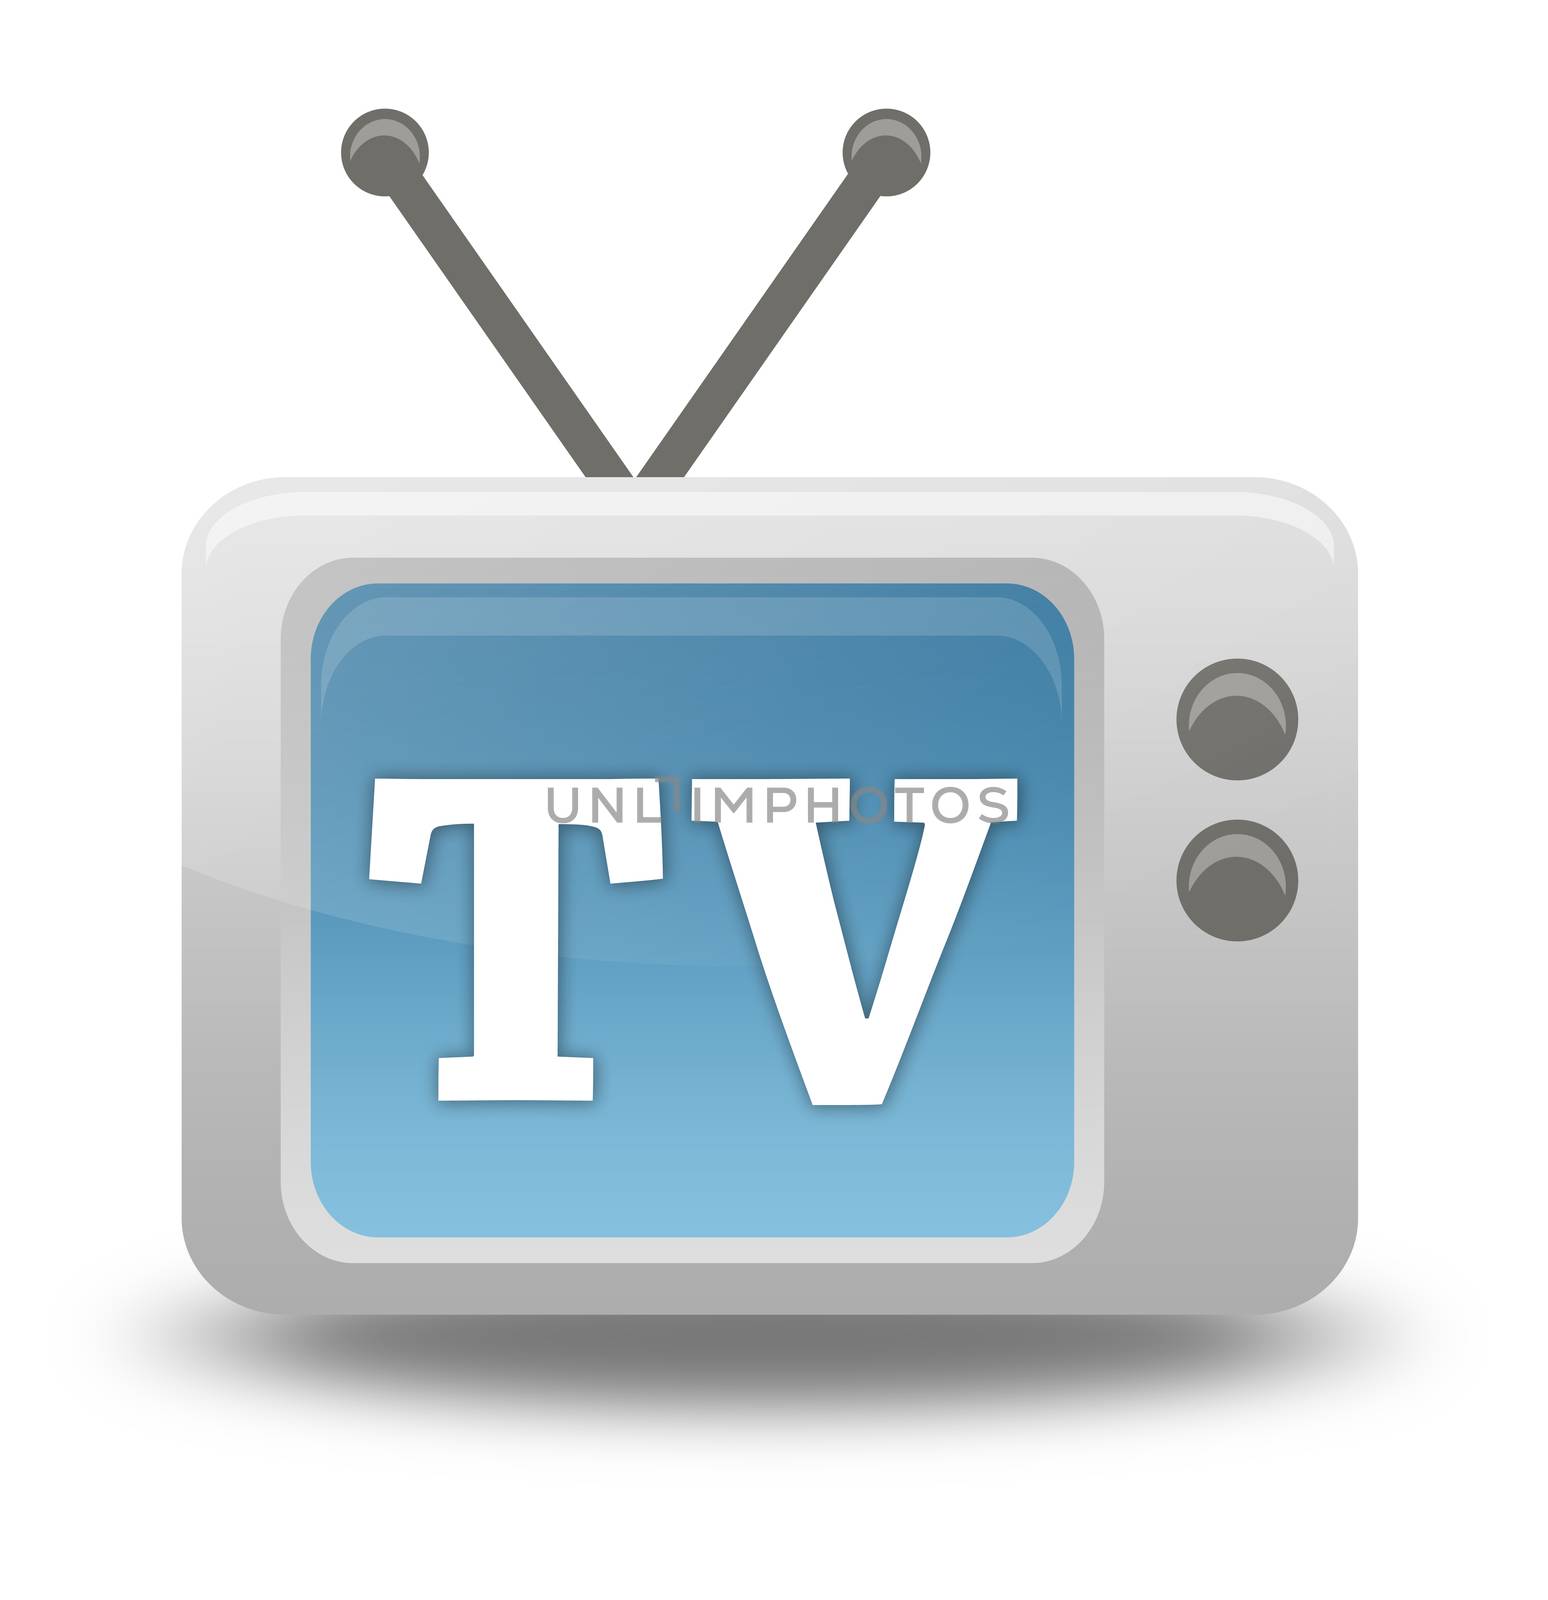 Carton-style icon with TV related wording